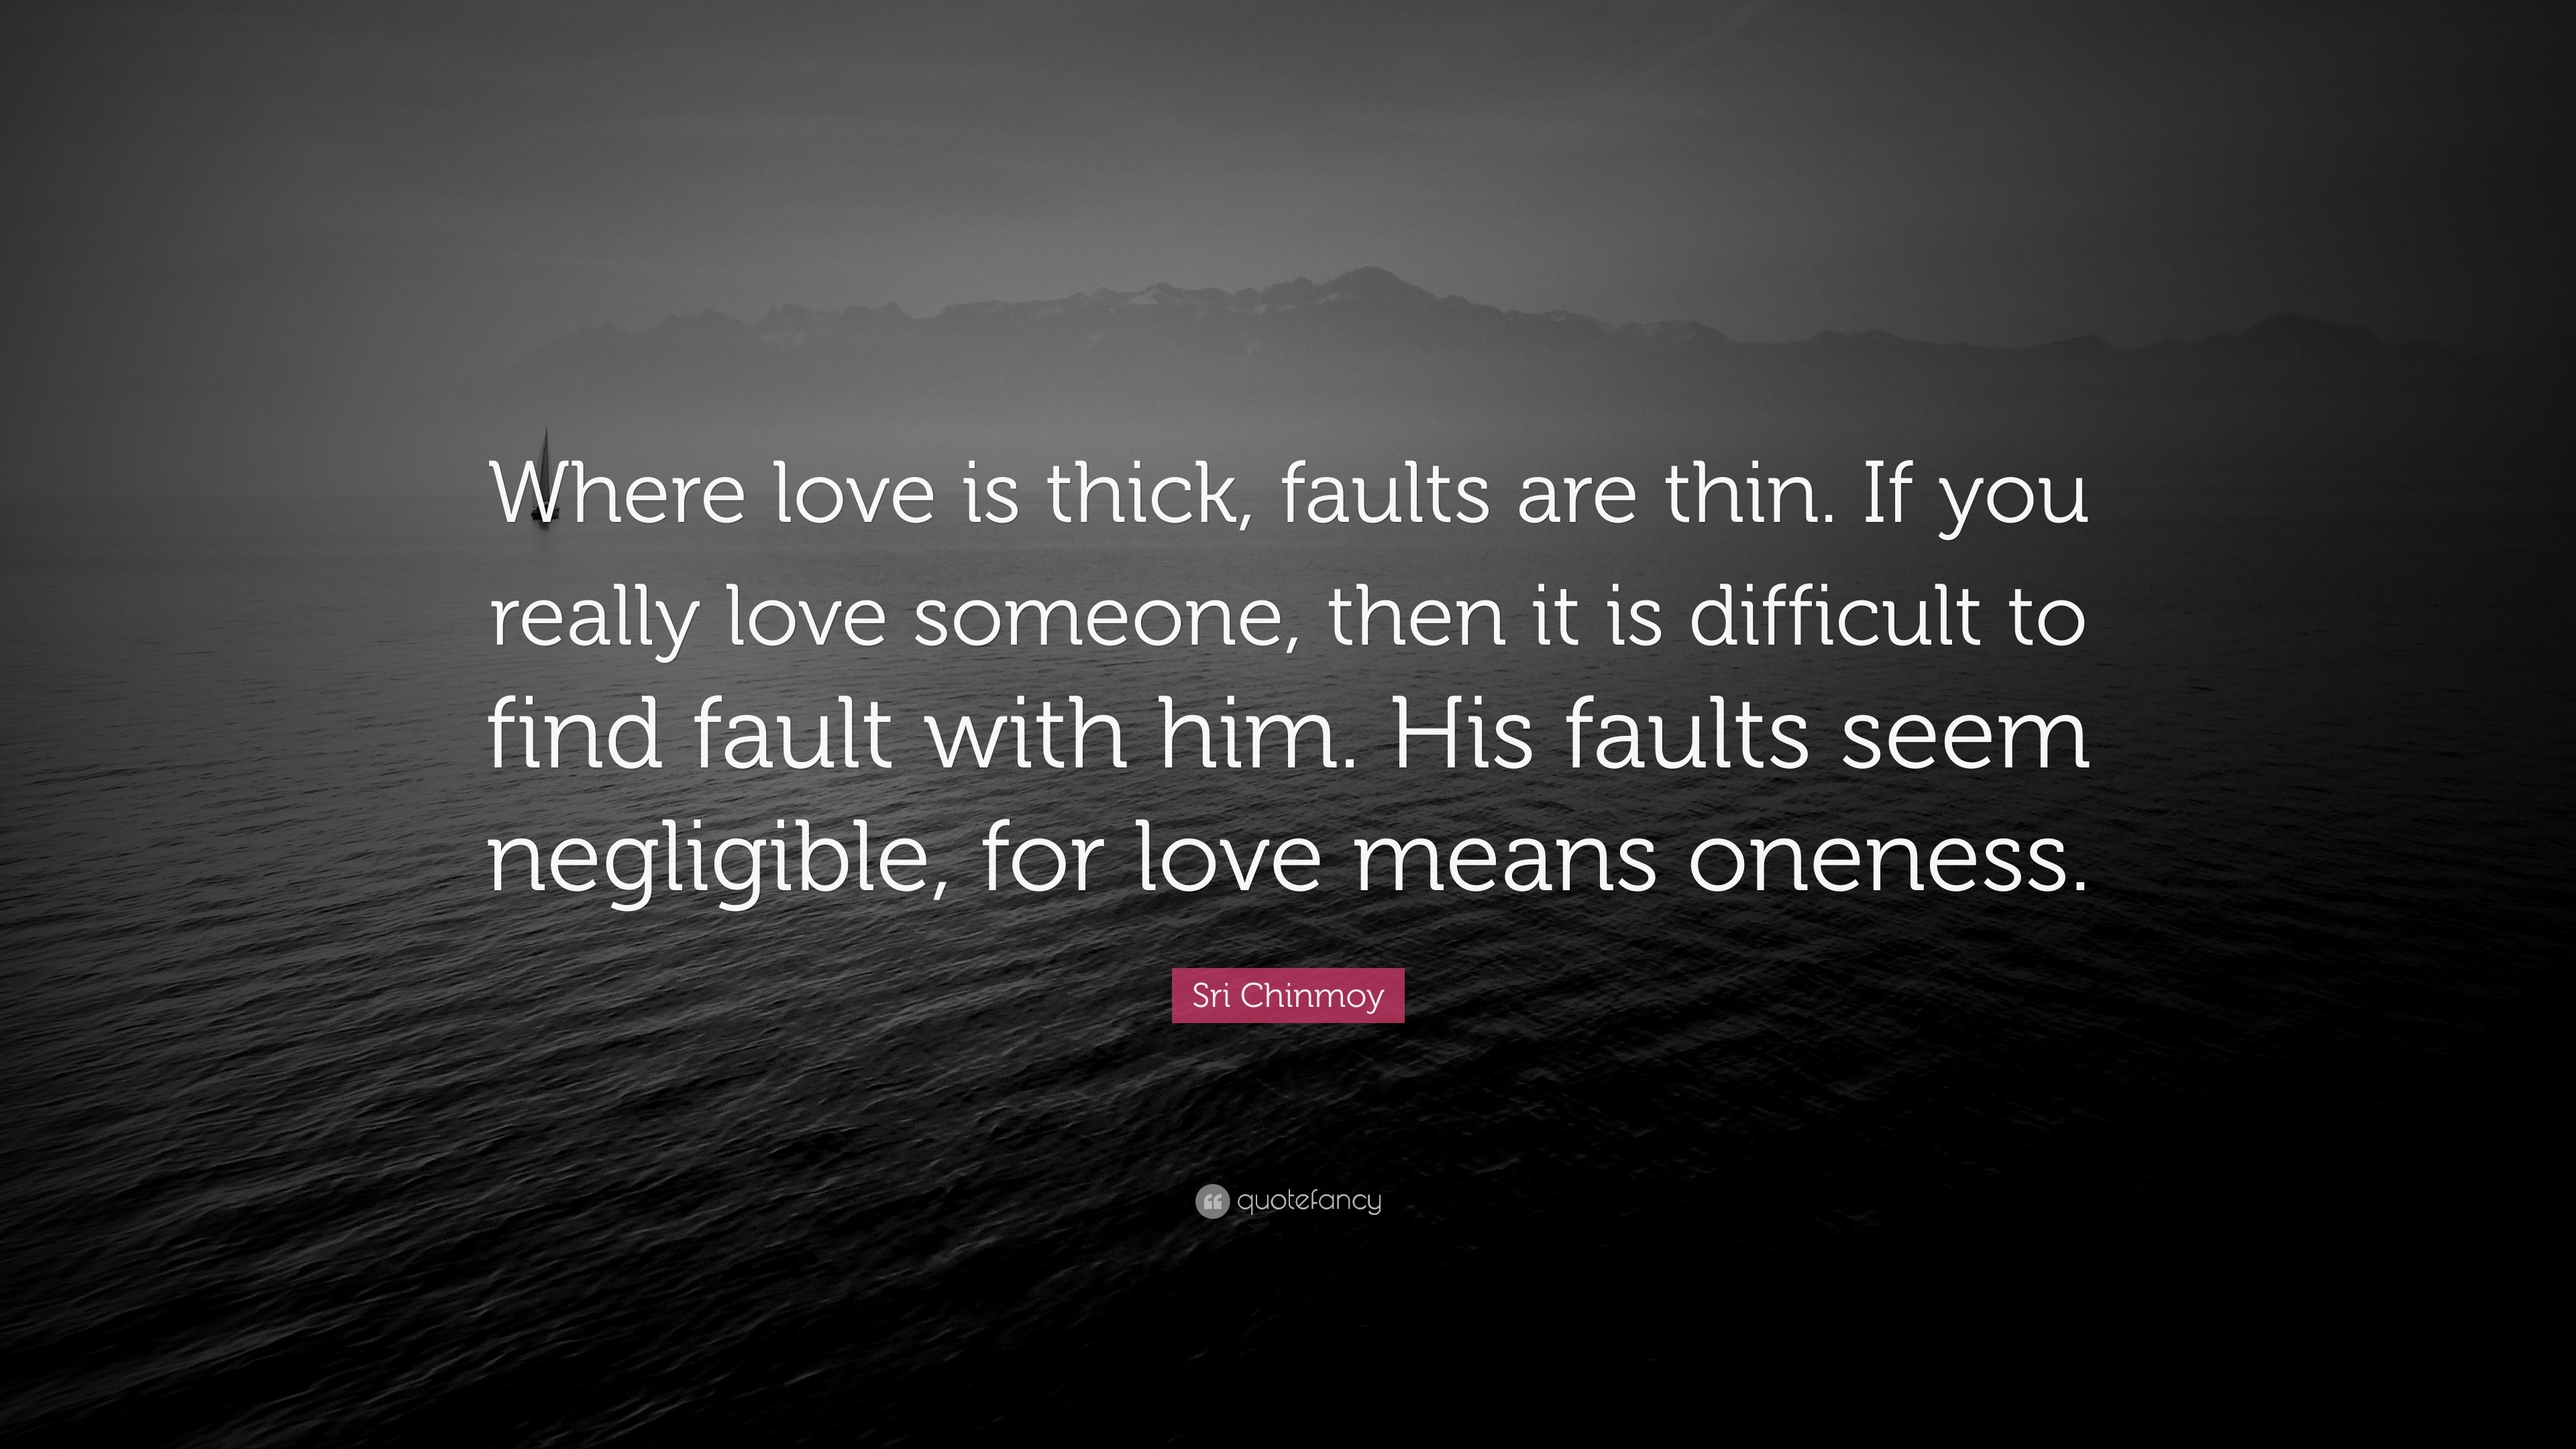 Sri Chinmoy Quote “Where love is thick faults are thin If you